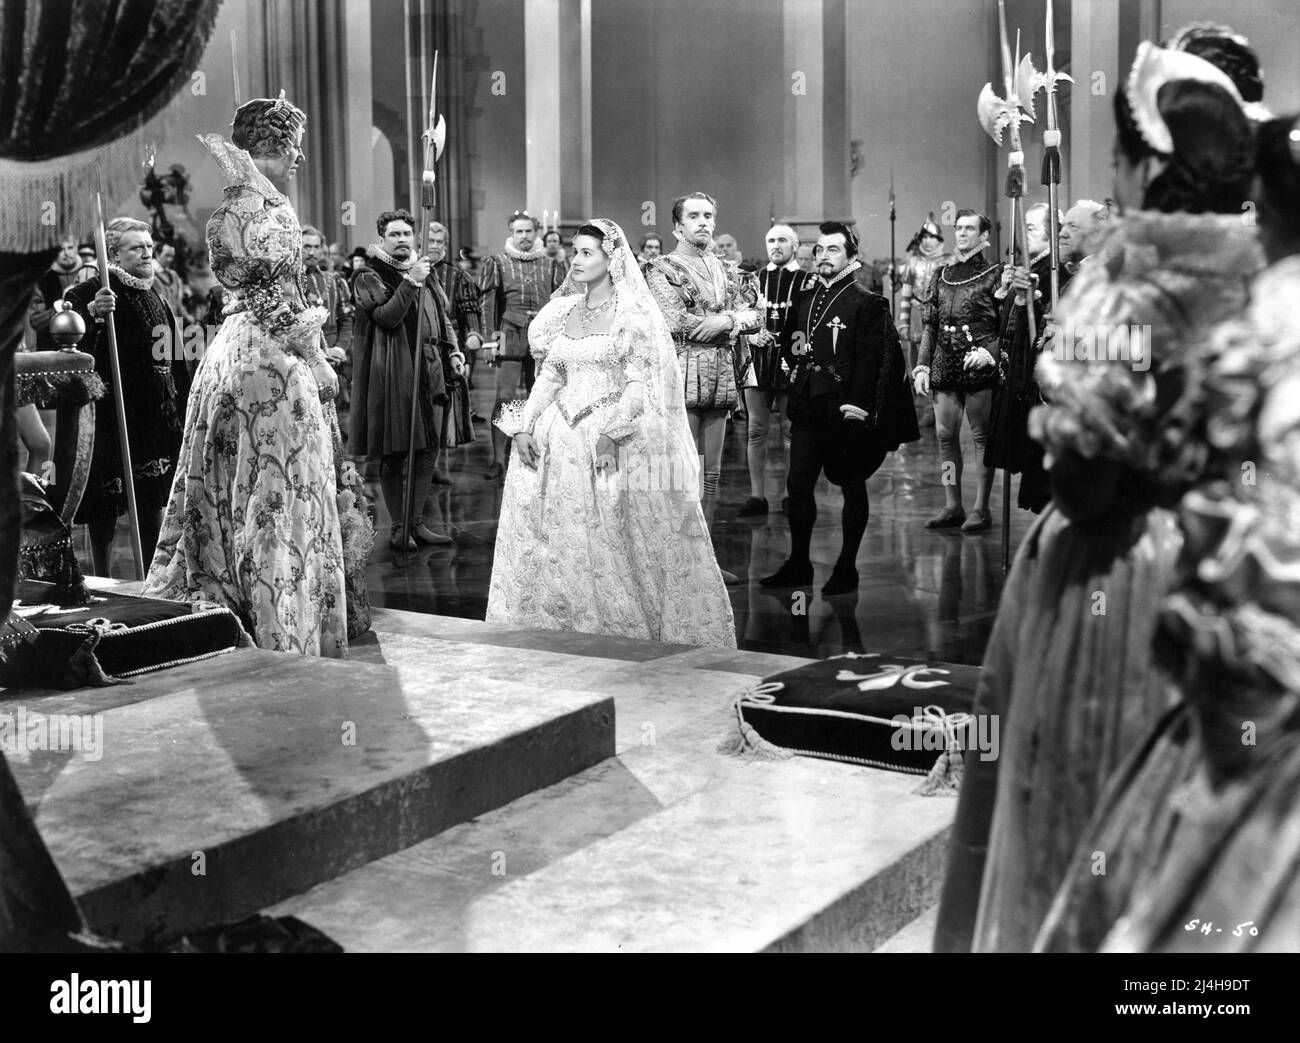 FLORA ROBSON as Elizabeth the First BRENDA MARSHALL HENRY DANIELL and CLAUDE RAINS in THE SEA HAWK 1940 director MICHAEL CURTIZ writers Howard Koch and Seton I. Miller costumes Orry-Kelly music Erich Wolfgang Korngold Warner Bros. Stock Photo